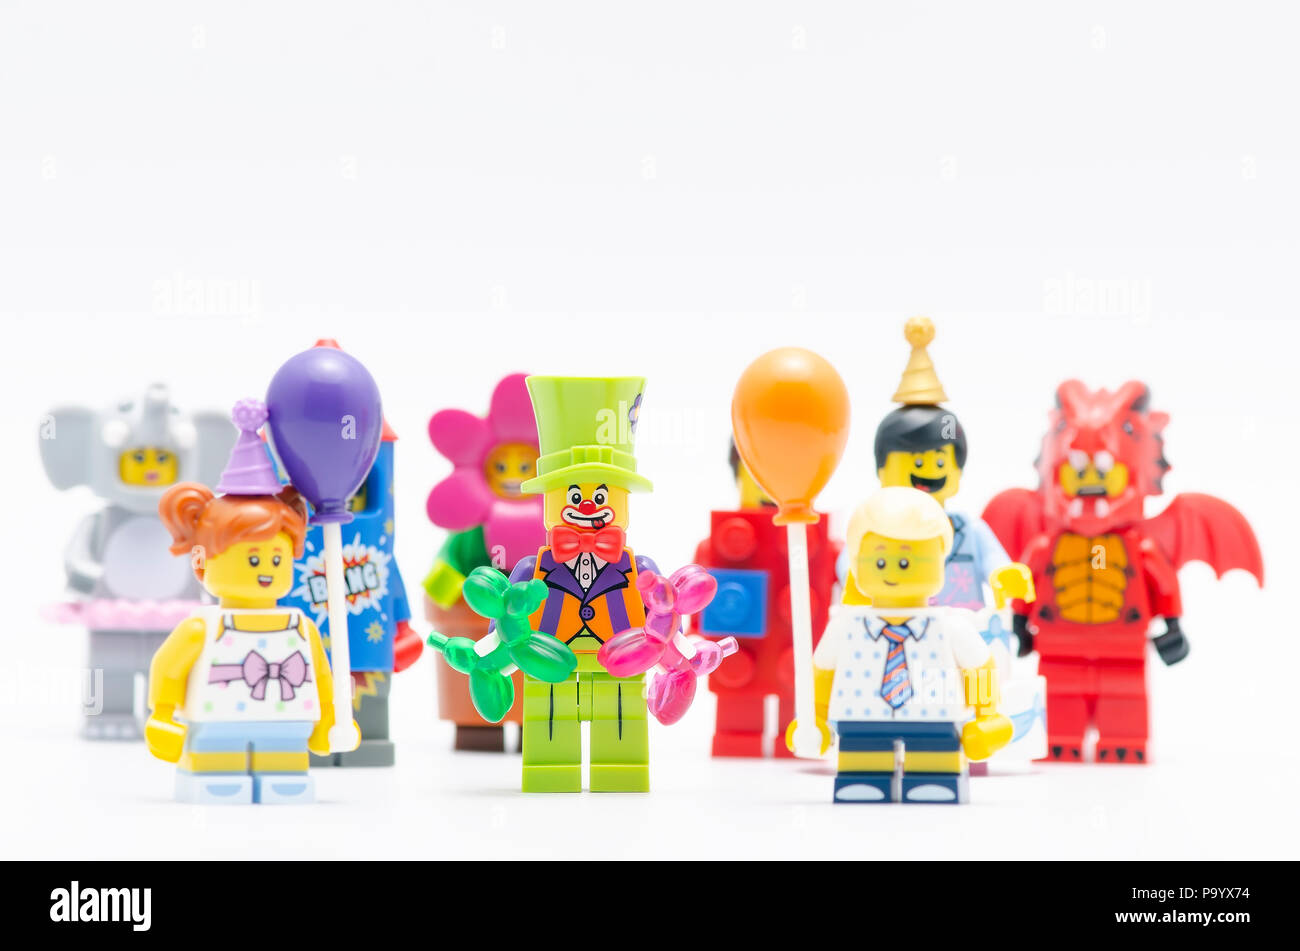 Lego collection series 18 party suit. Lego minifigures are manufactured by The Lego Group. Stock Photo